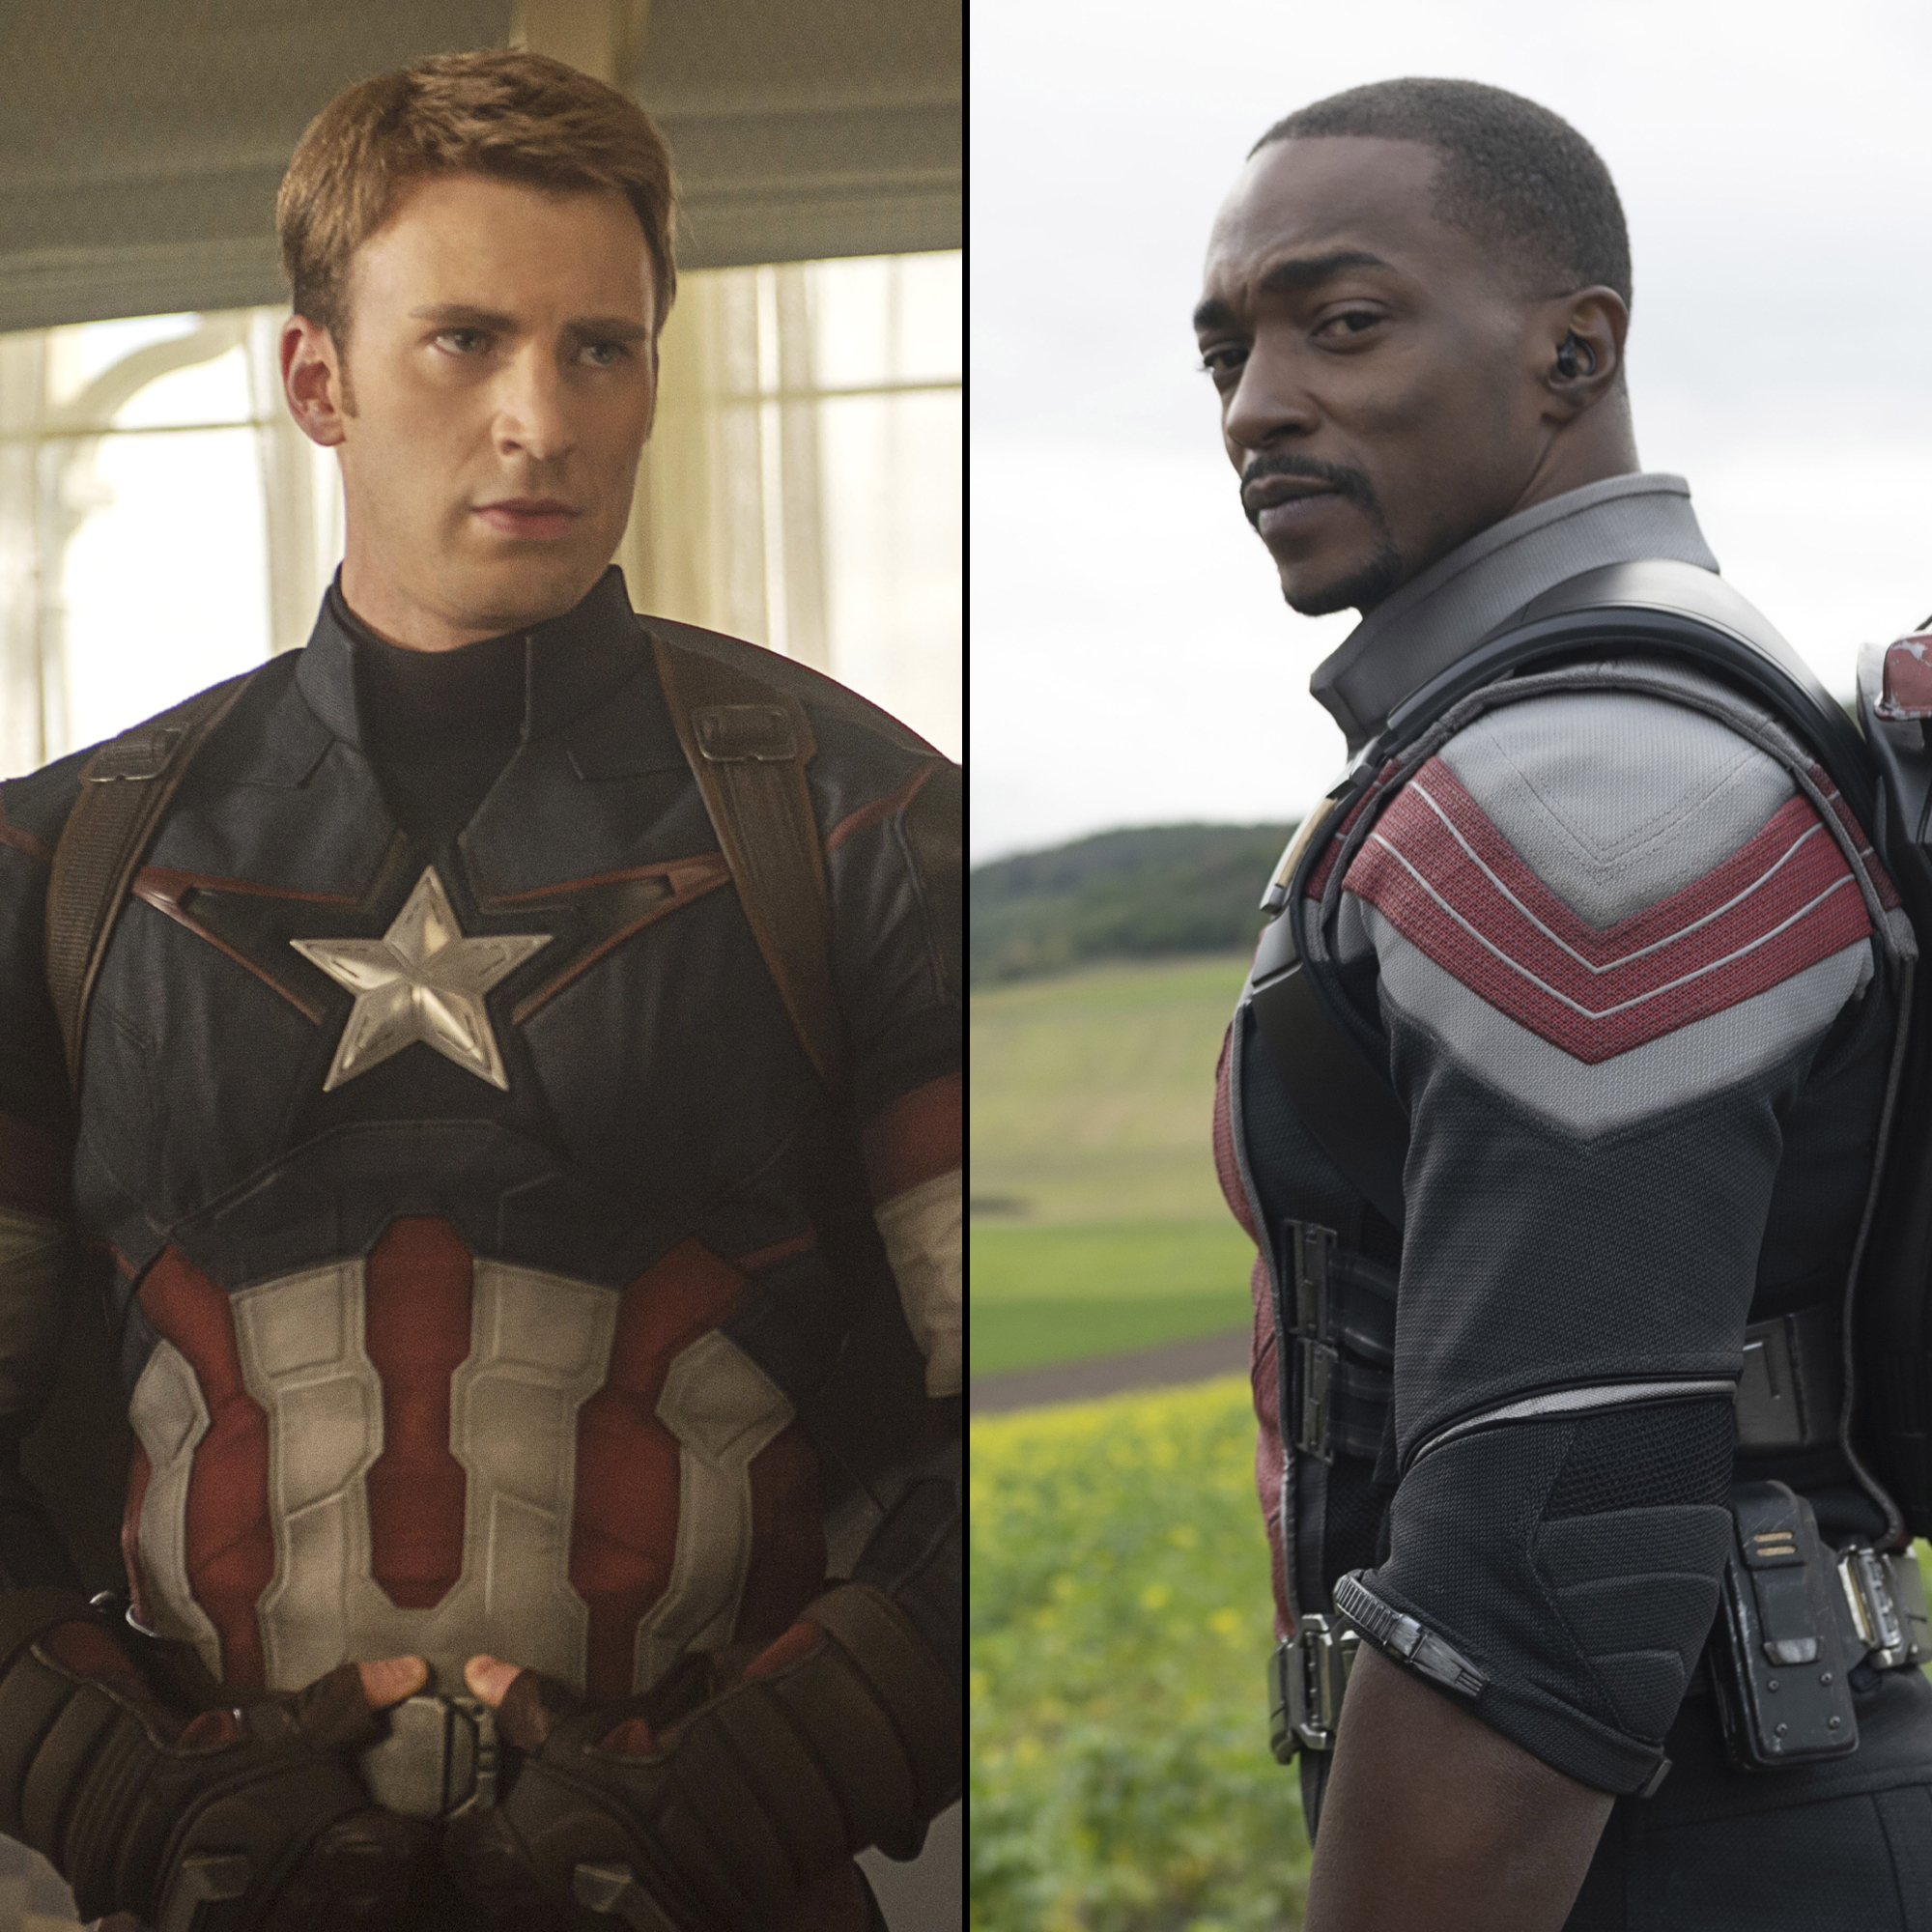 Captain America Movies In Order: How To Watch Steve Rogers' Films